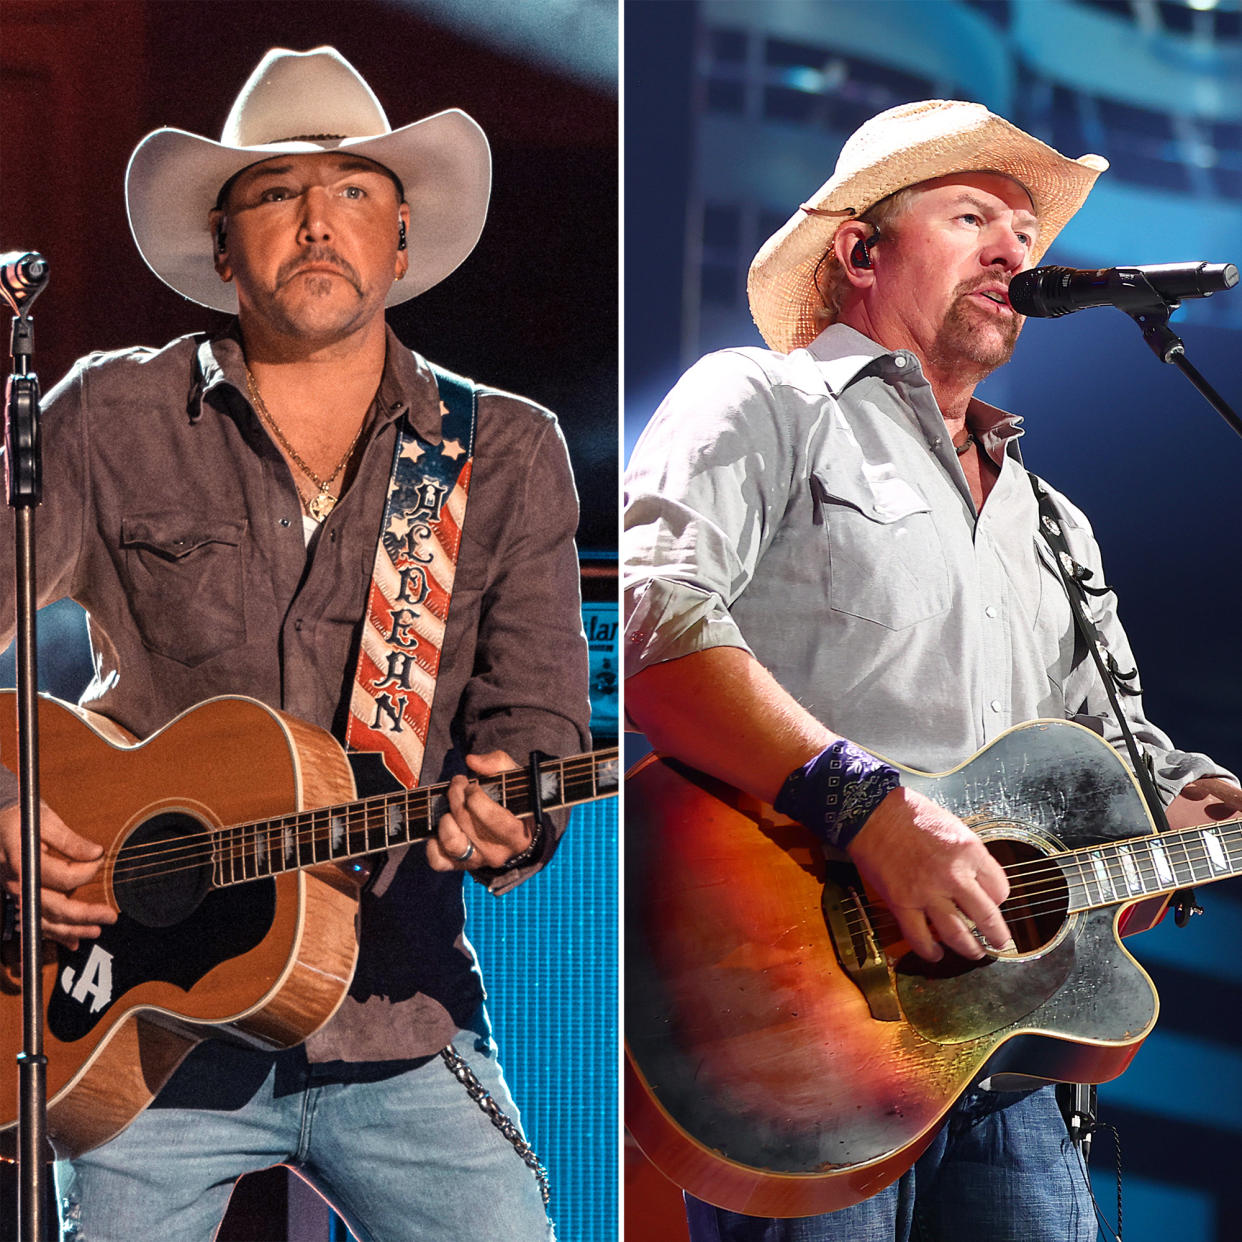 Jason Aldean Honors Toby Keith at ACM Awards 3 Months After His Death